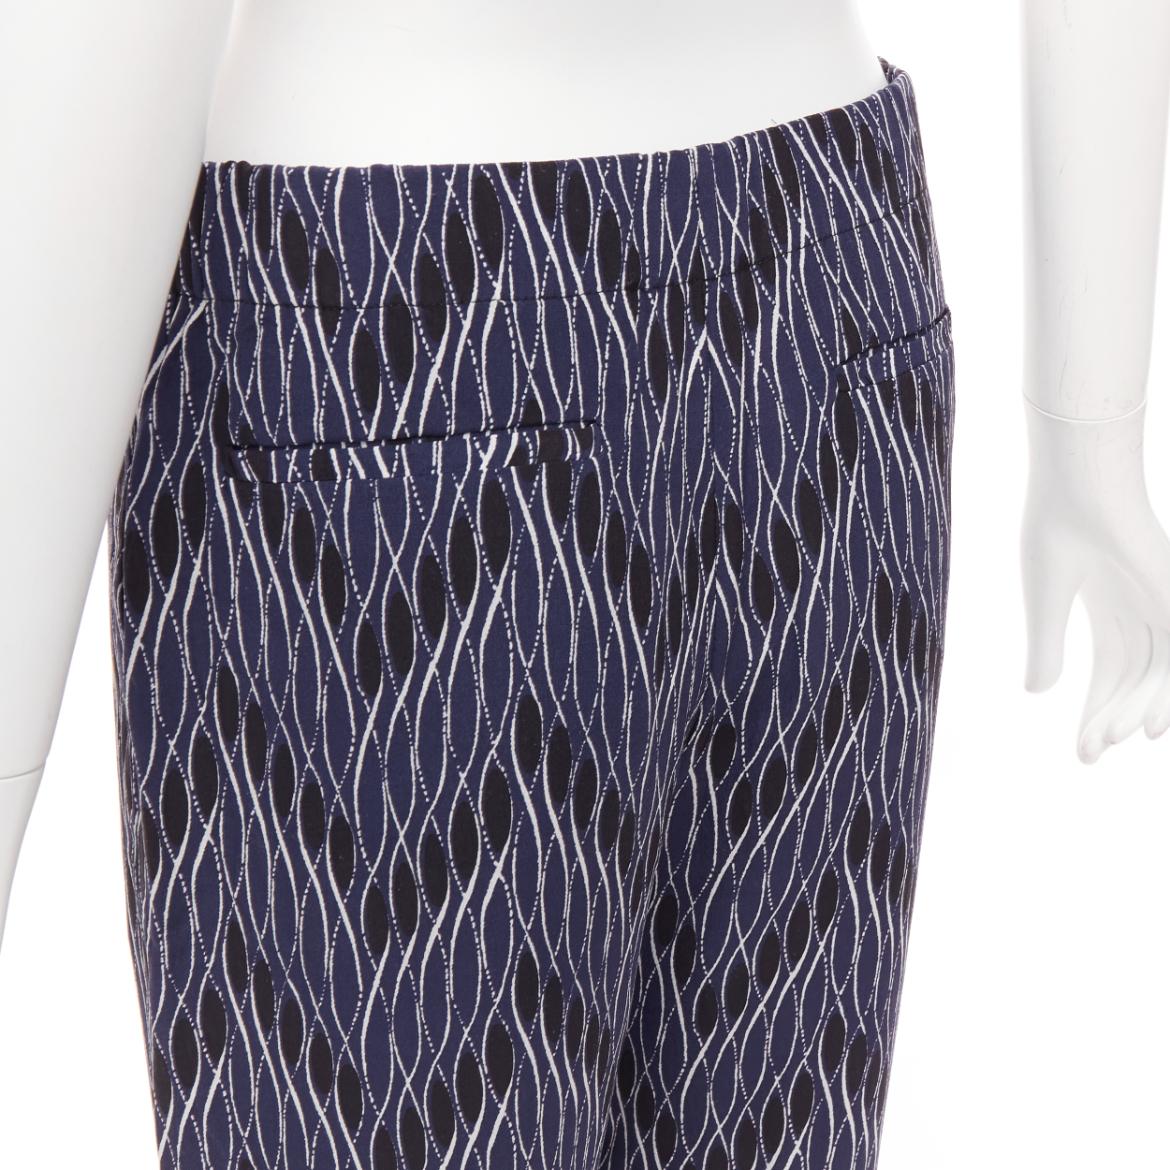 MARNI navy black geometric pattern print elastic waist crop pants IT40 S
Reference: CELG/A00436
Brand: Marni
Material: Silk
Color: Black, Navy
Pattern: Abstract
Closure: Elasticated
Extra Details: Back pockets.
Made in: Italy

CONDITION:
Condition: